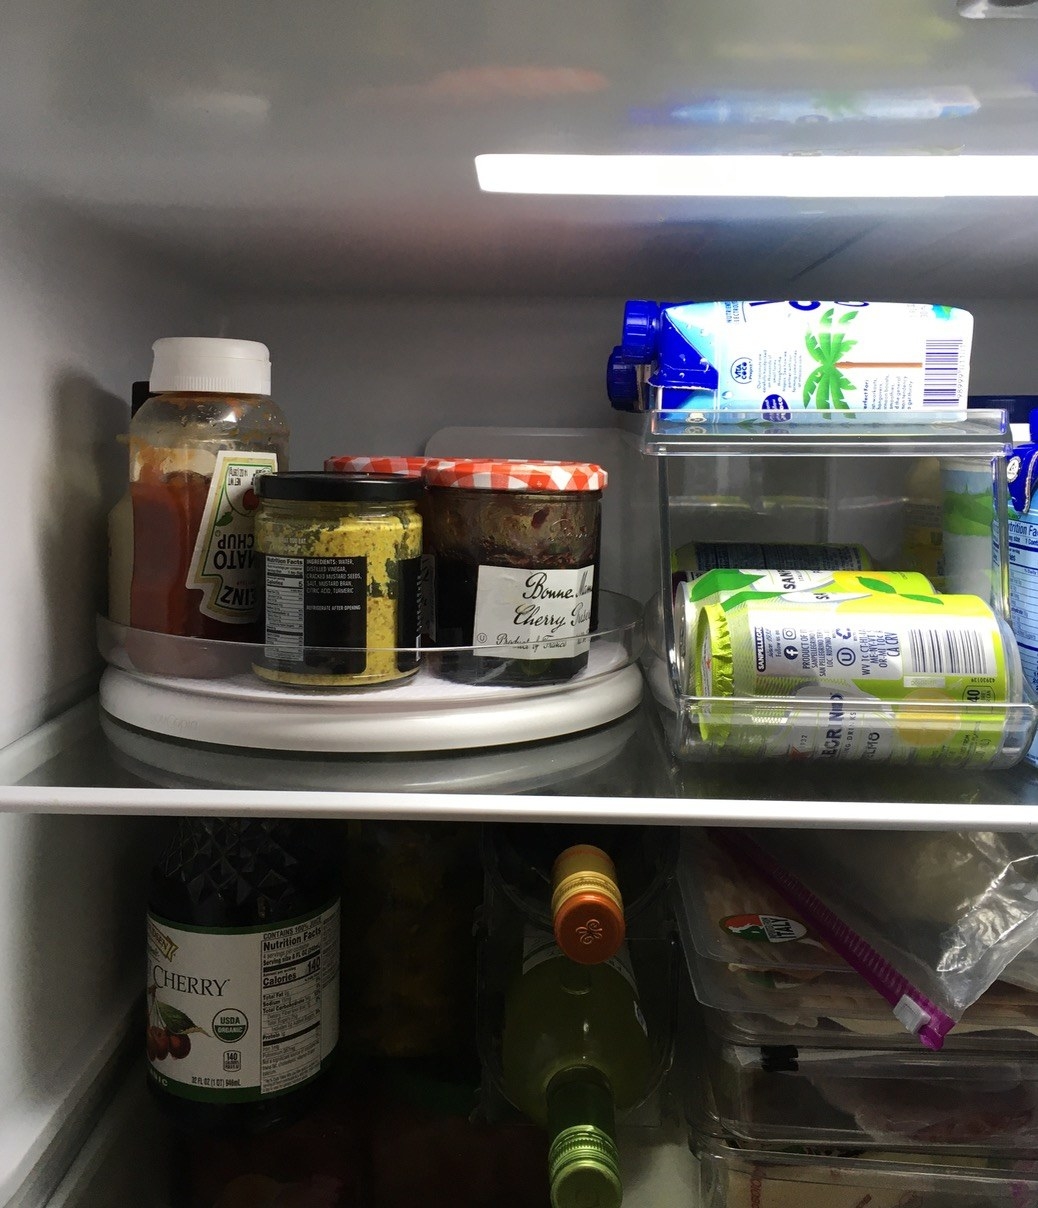 The turntable holding several condiments on the top shelf of a fridge